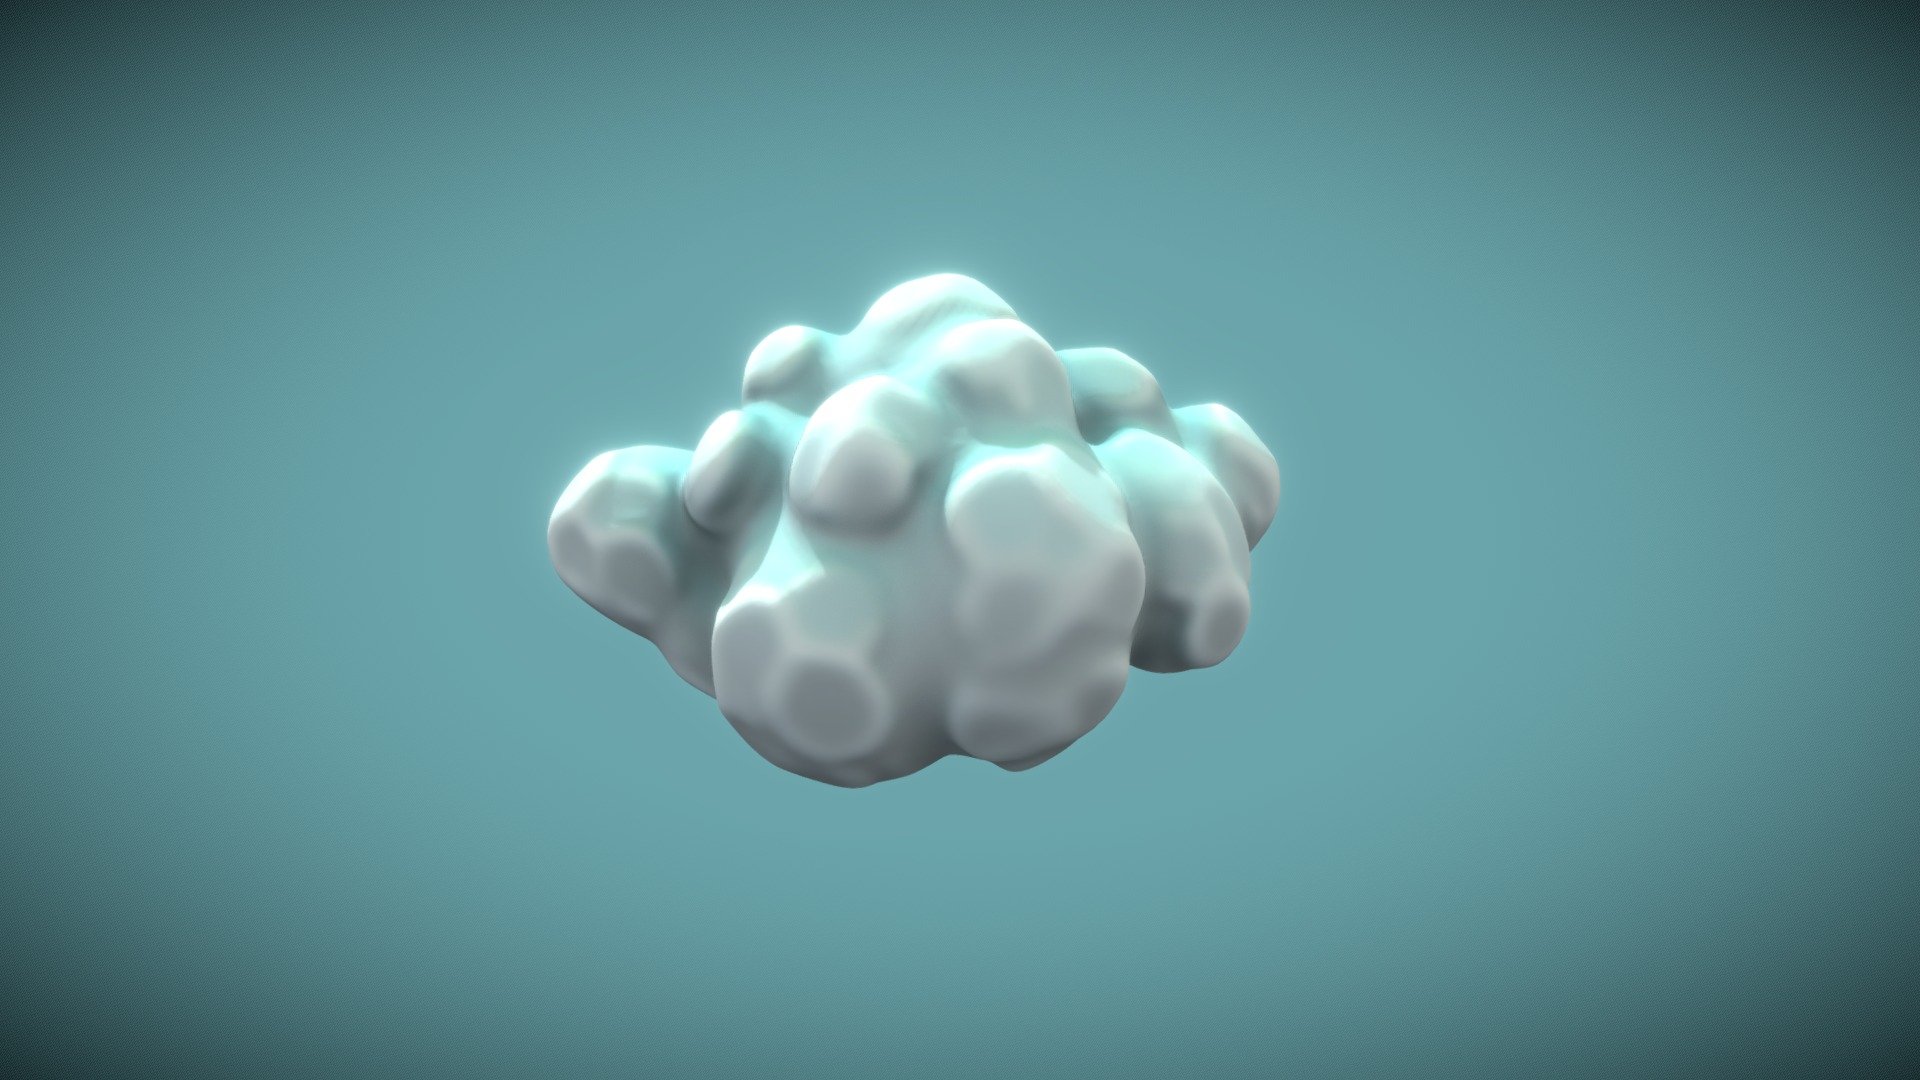 Cloud made during a GameJam (sept 2021) at school

Design for the game Abductcows

https://odlab.artstation.com/

https://raiter.artstation.com/ https://sketchfab.com/VanHyfte_Clement

https://sketchfab.com/thangzy https://thangzy.artstation.com/ https://twitter.com/80Level/status/1439636798330843137

https://www.artstation.com/romain_boucher https://sketchfab.com/Boucher.Romain

https://www.artstation.com/carbone147 https://sketchfab.com/Carbone159 - Cloud - 3D model by Odlab 3d model